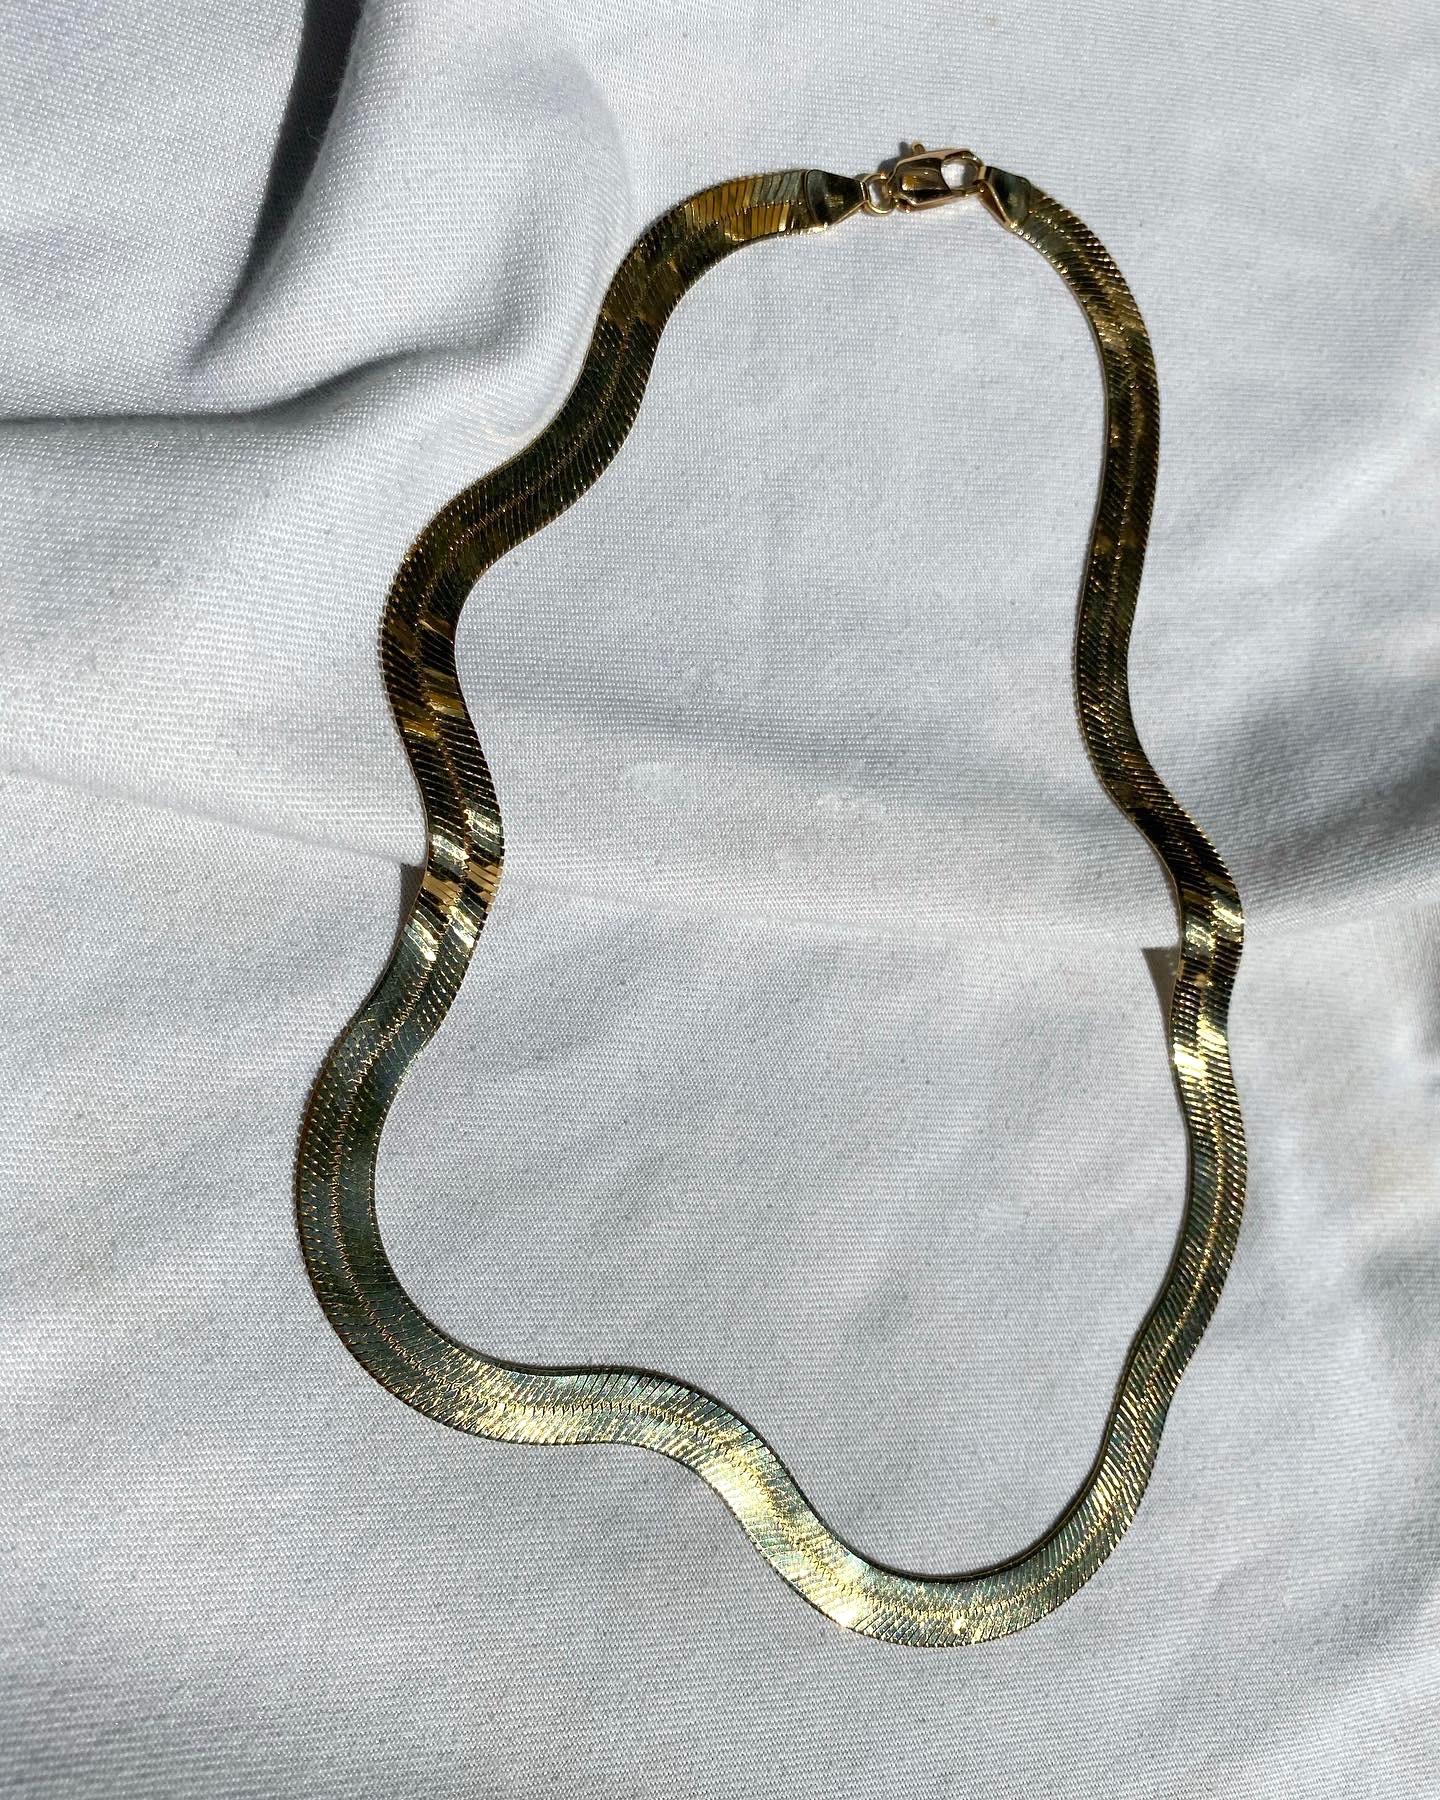 Vintage 14 Karat Gold Thick Herringbone Chain Necklace In Good Condition For Sale In Crownsville, MD